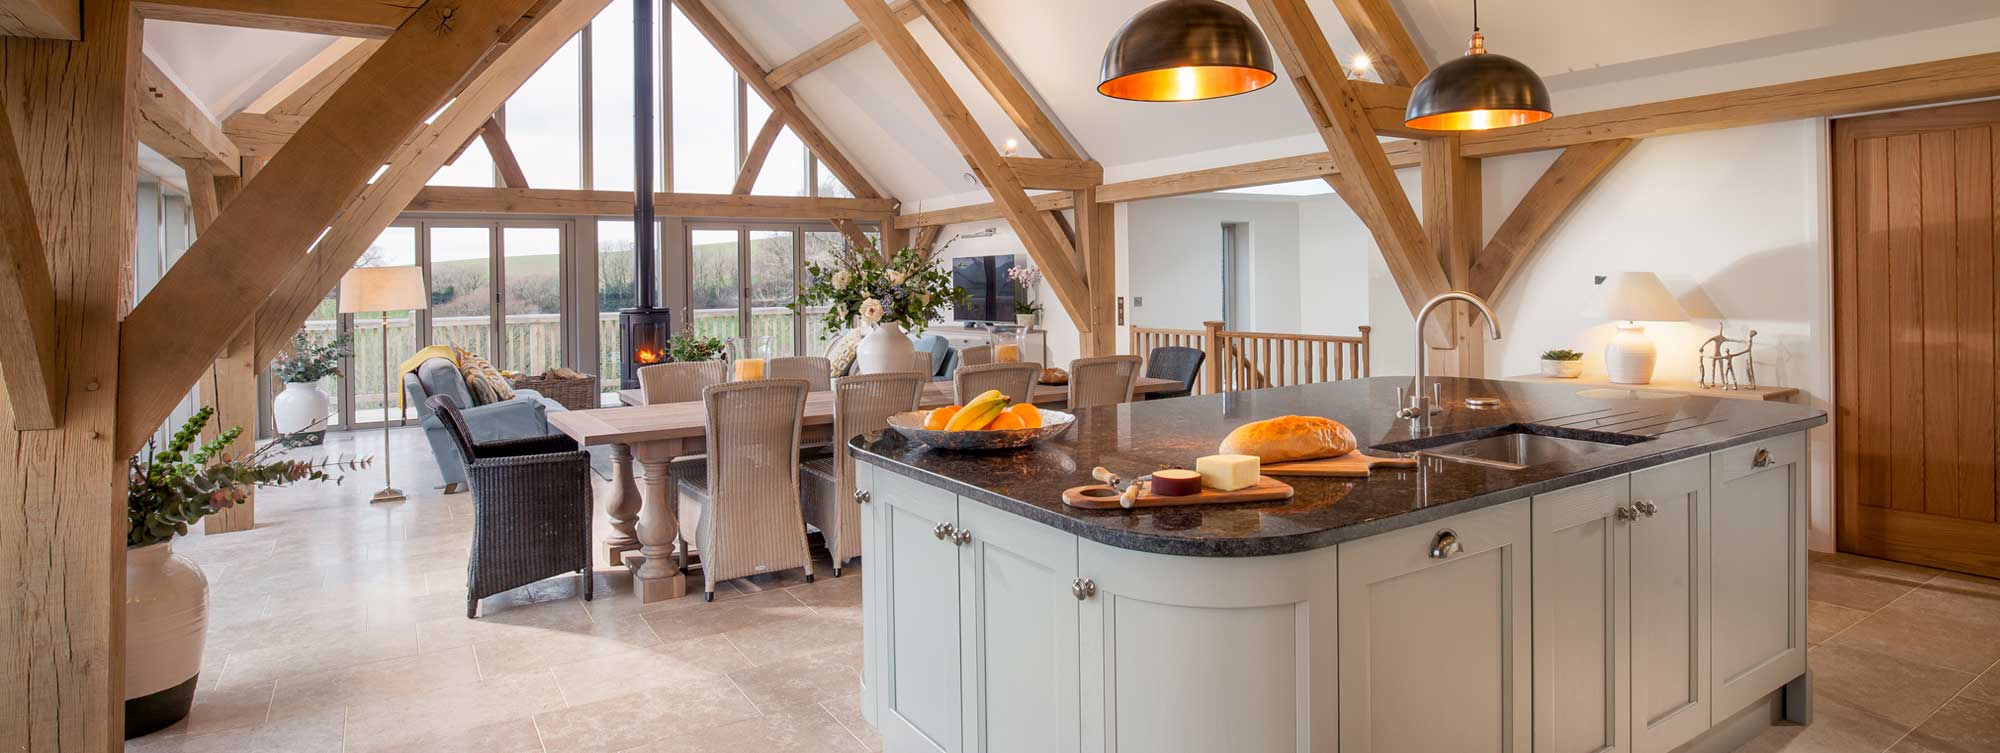 Win with Premier Cottages and Made in Oldstead